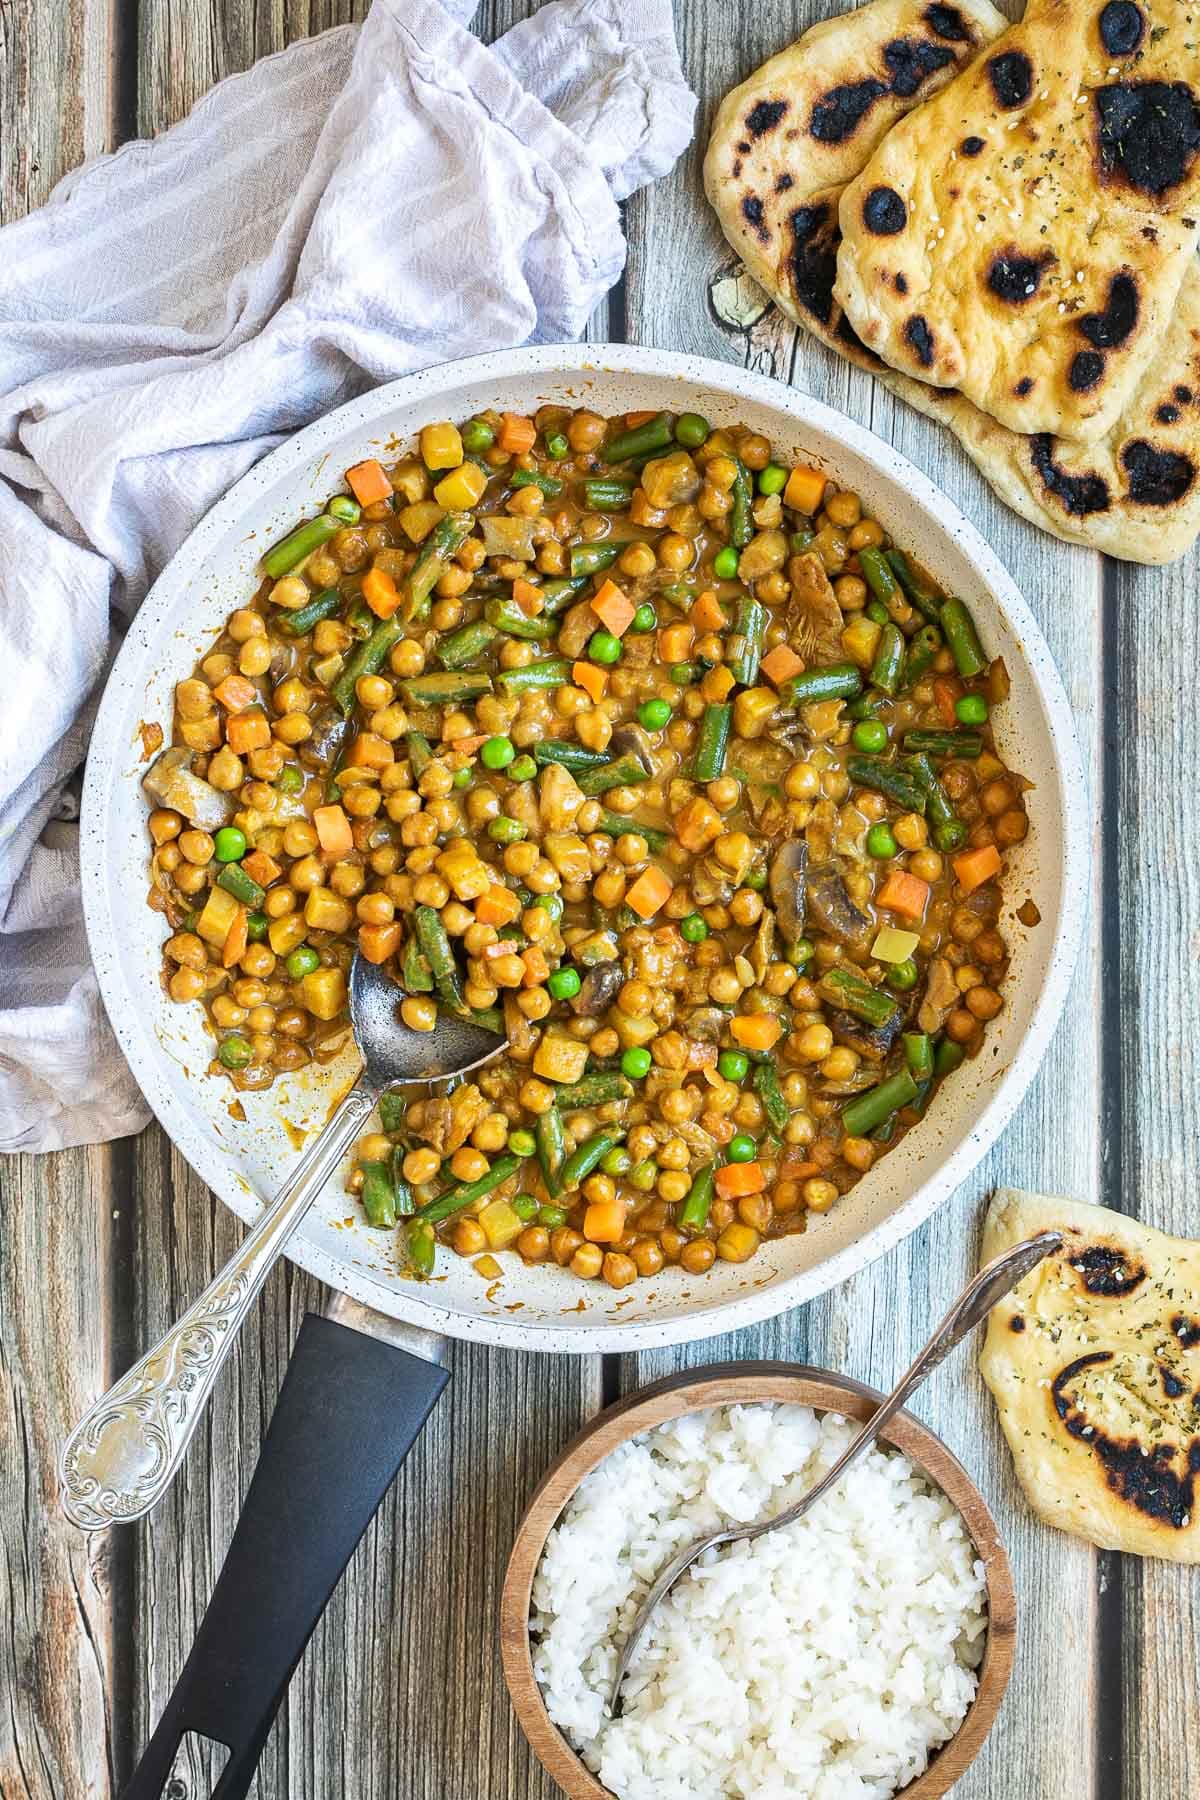 White frying pan full of vegetables like chickpeas, green beans, chopped carrots, green peas, chopped mushroom, and potatoes swimming in a brown-orange sauce. Naan bread and a brown bowl of rice are next to it.